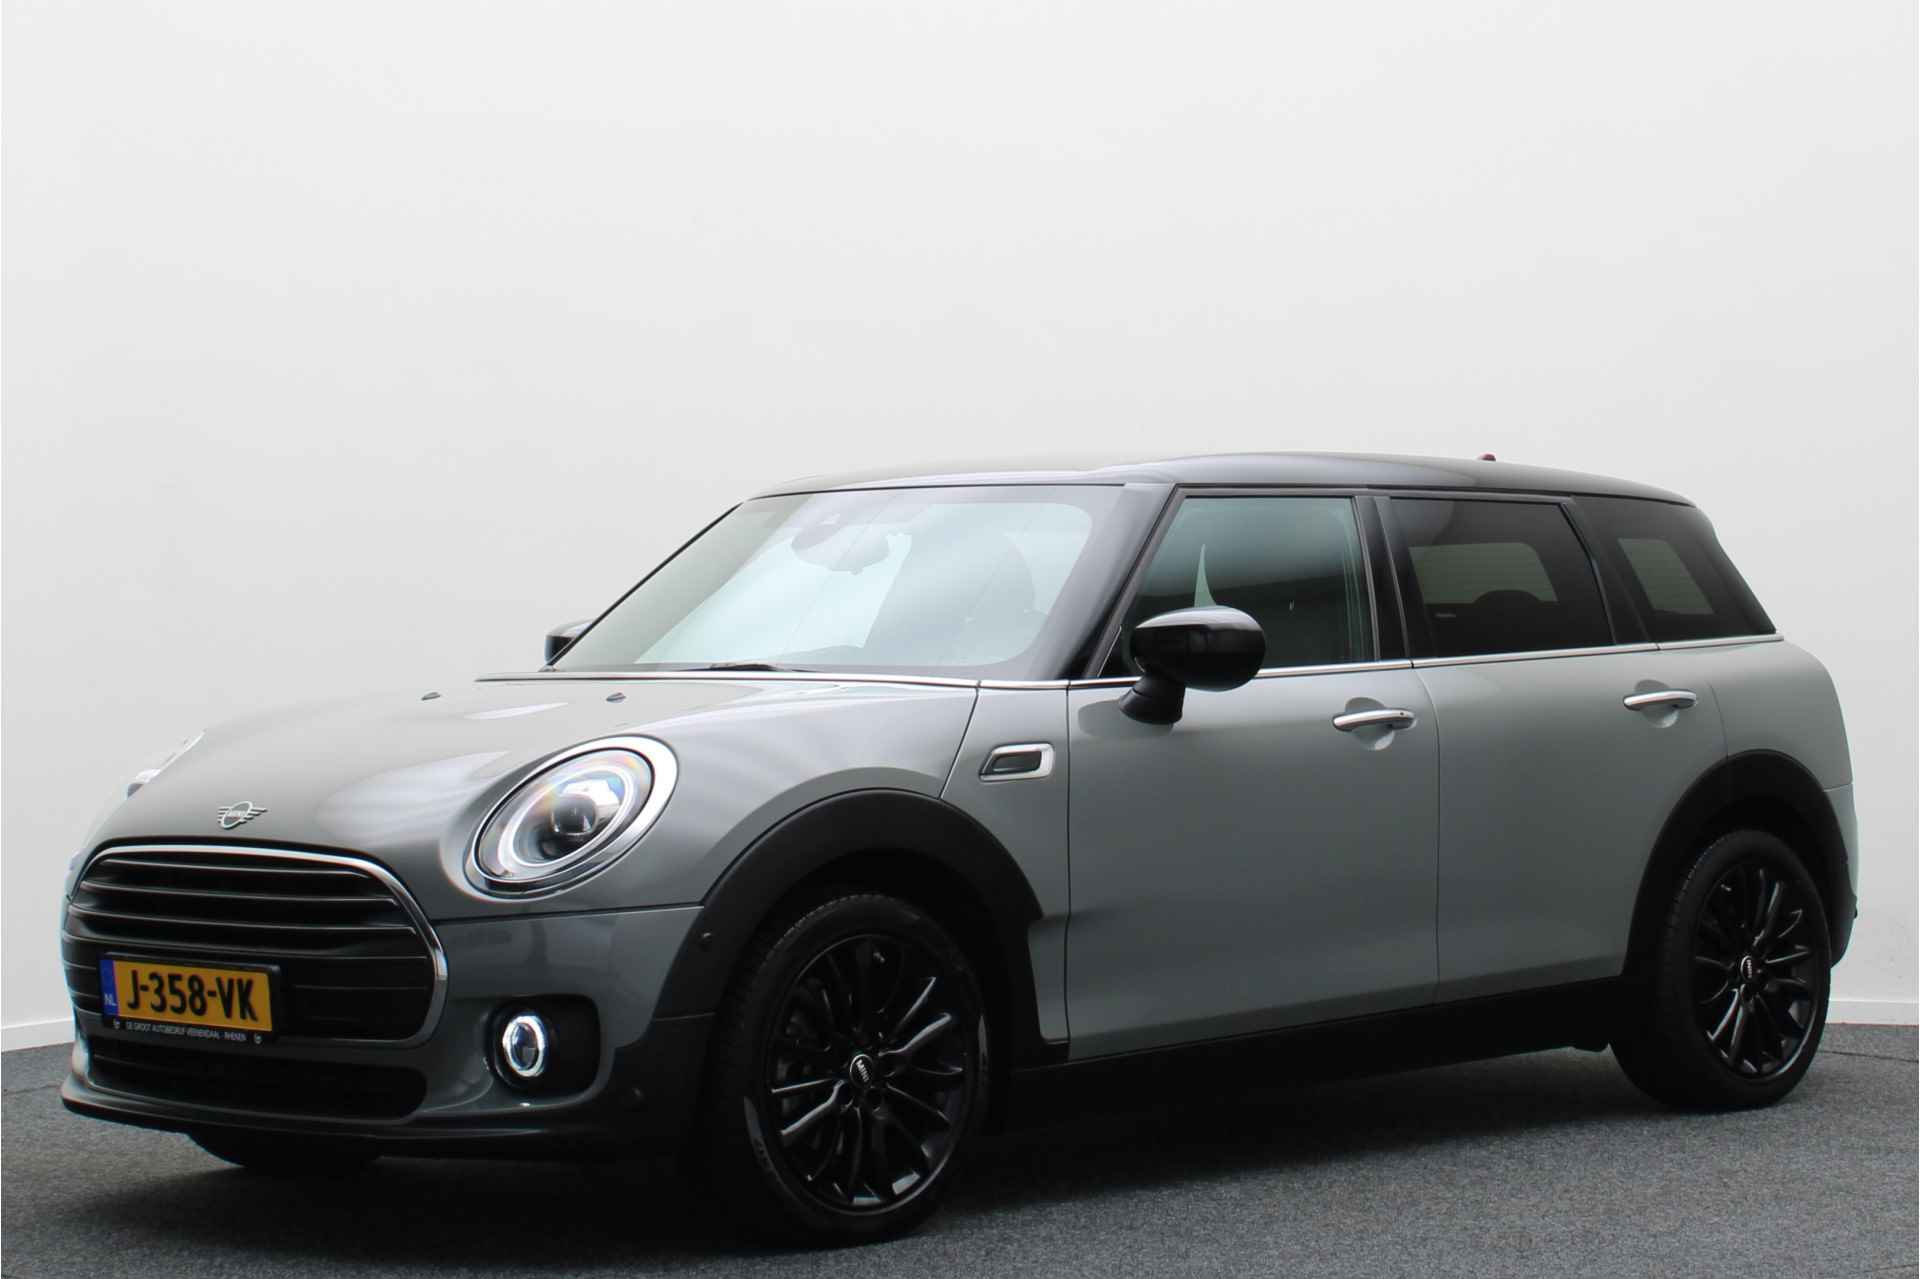 MINI Clubman 1.5 Cooper Business Edition Automaat LED, Keyless, Two-Tone lak, Navigatie, Cruise, PDC, Climate, 17” - 14/44